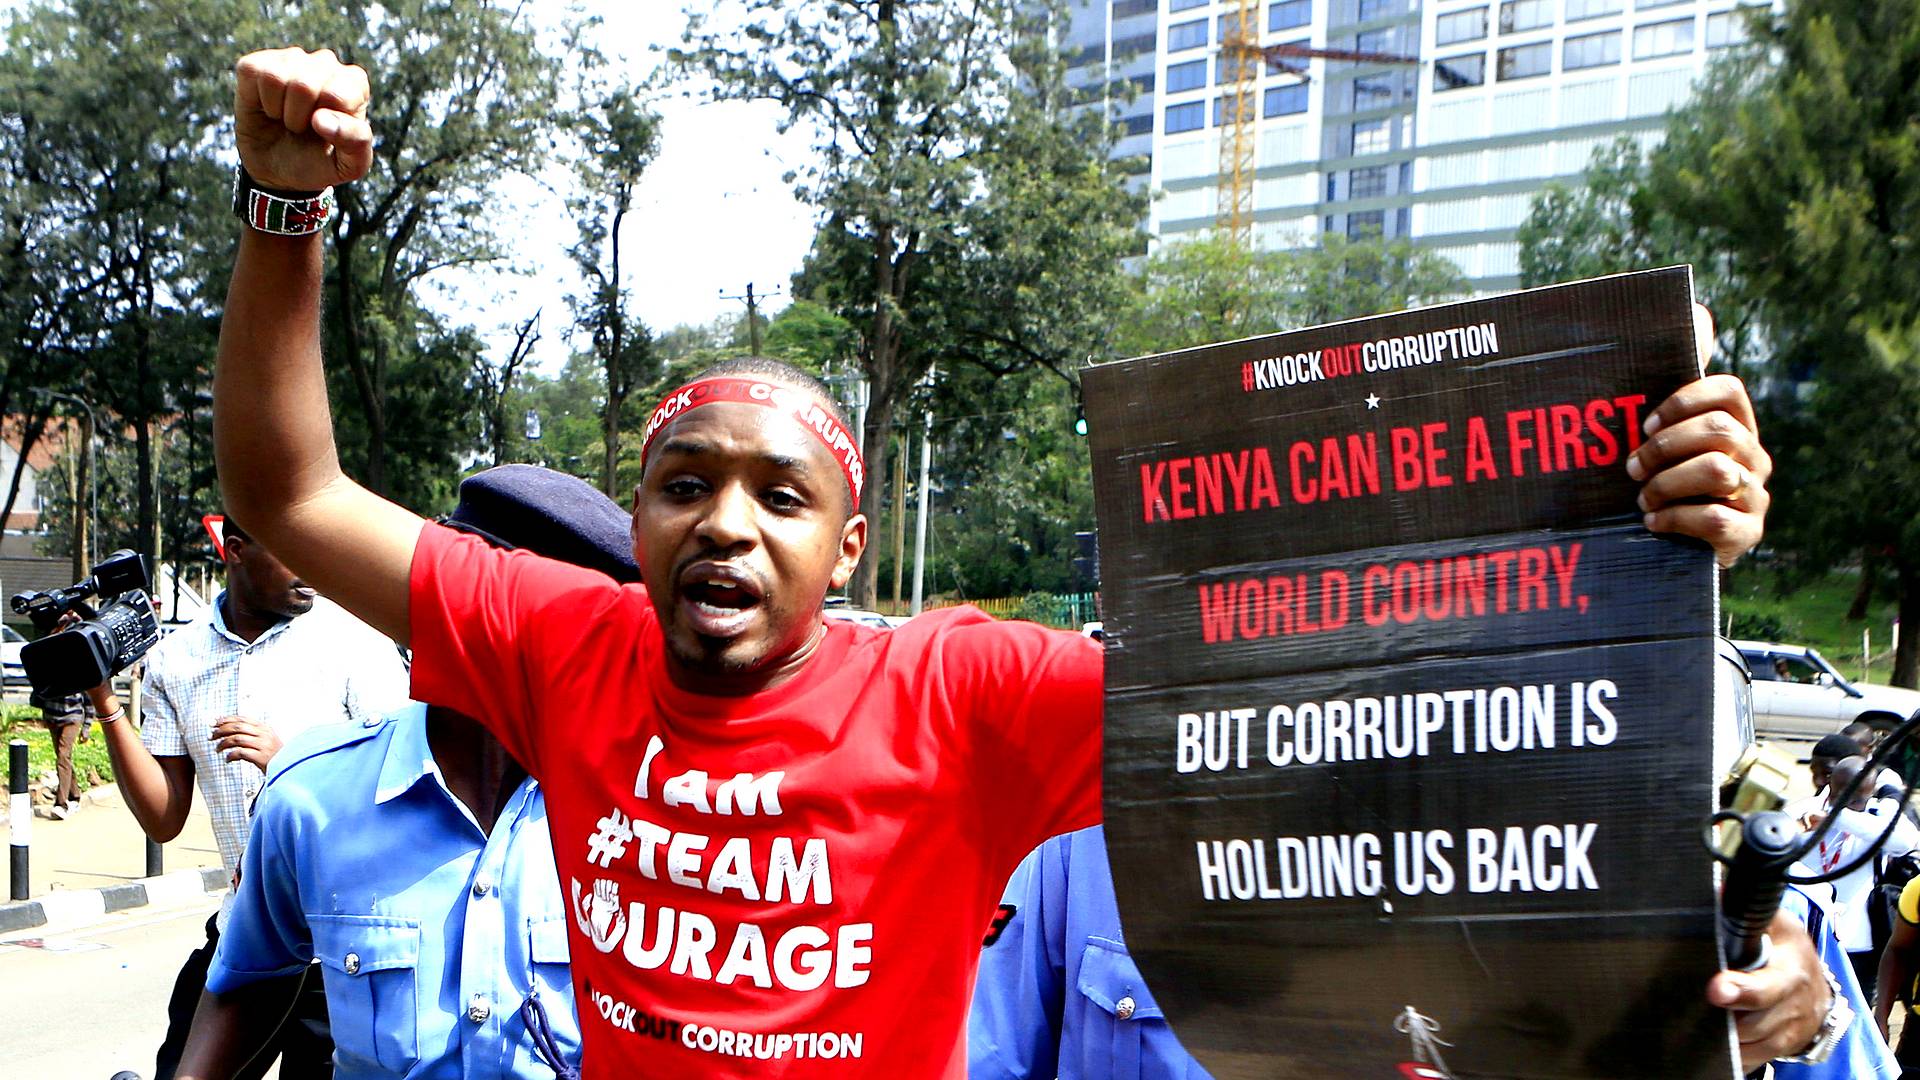 Murder of election chief casts shadow over next week's elections as many Kenyans take to streets to demand justice.